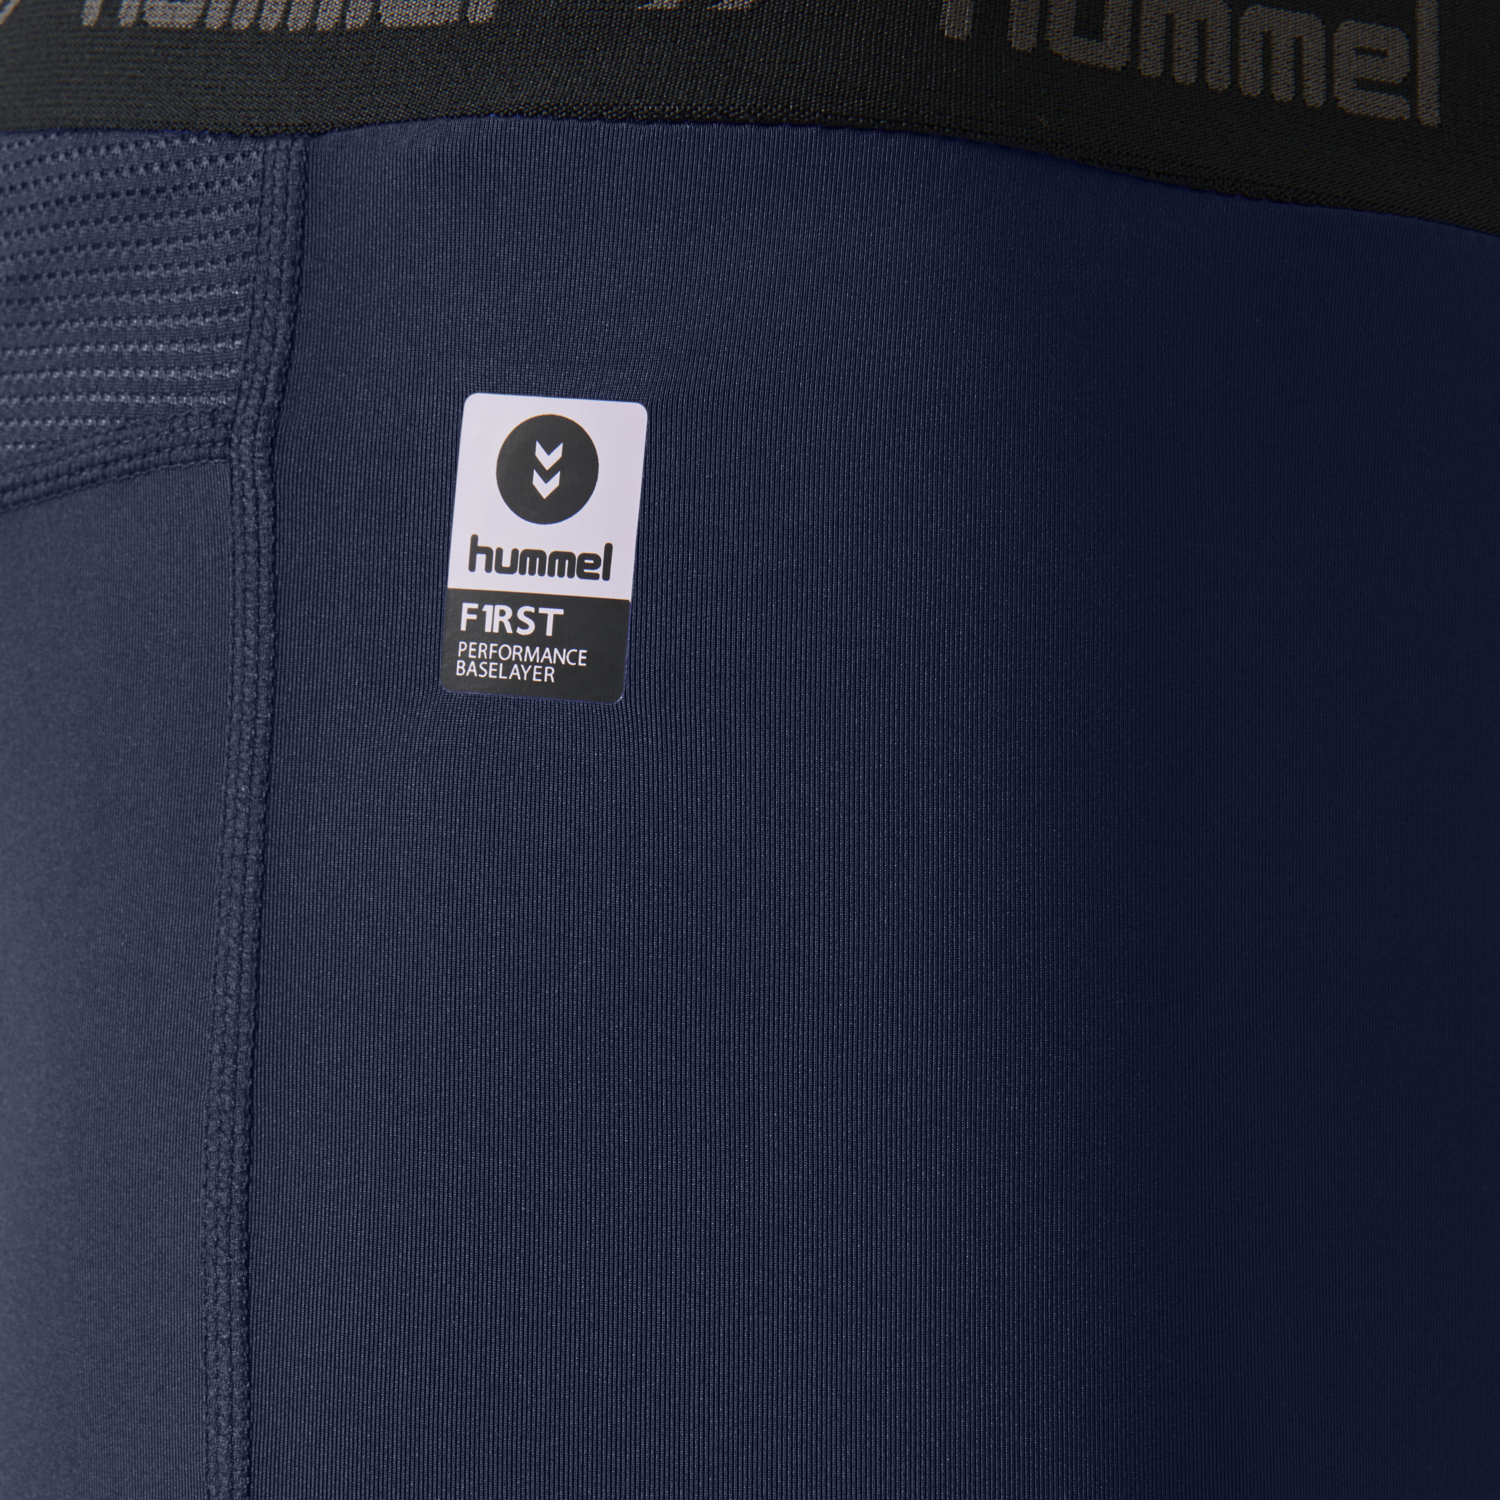 Details about   Hummel First Performance Kids Boys Sports Training Workout Running Shorts Tights 